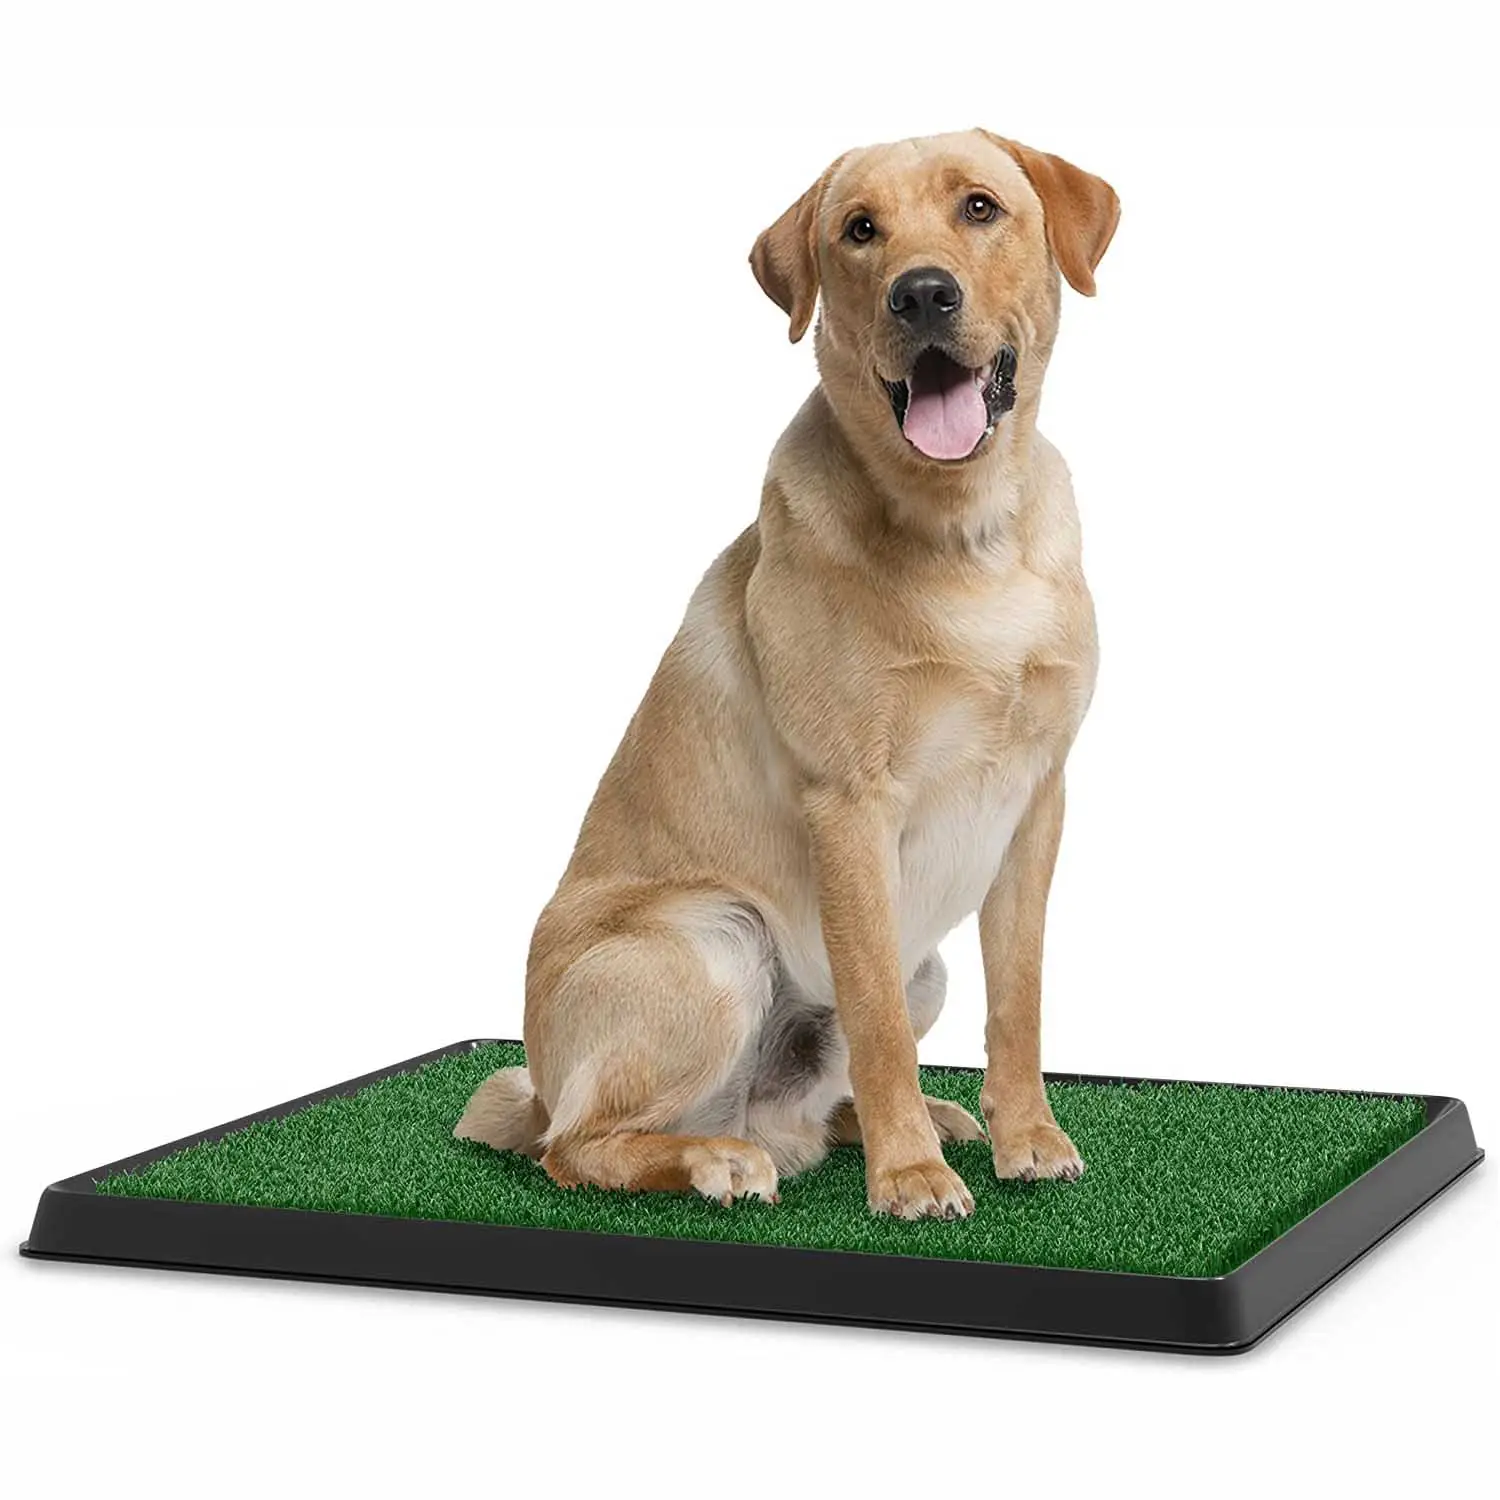 Indoor Three Layers Removable Portable Artificial Grass Puppy Dogs Training Pad with Tray